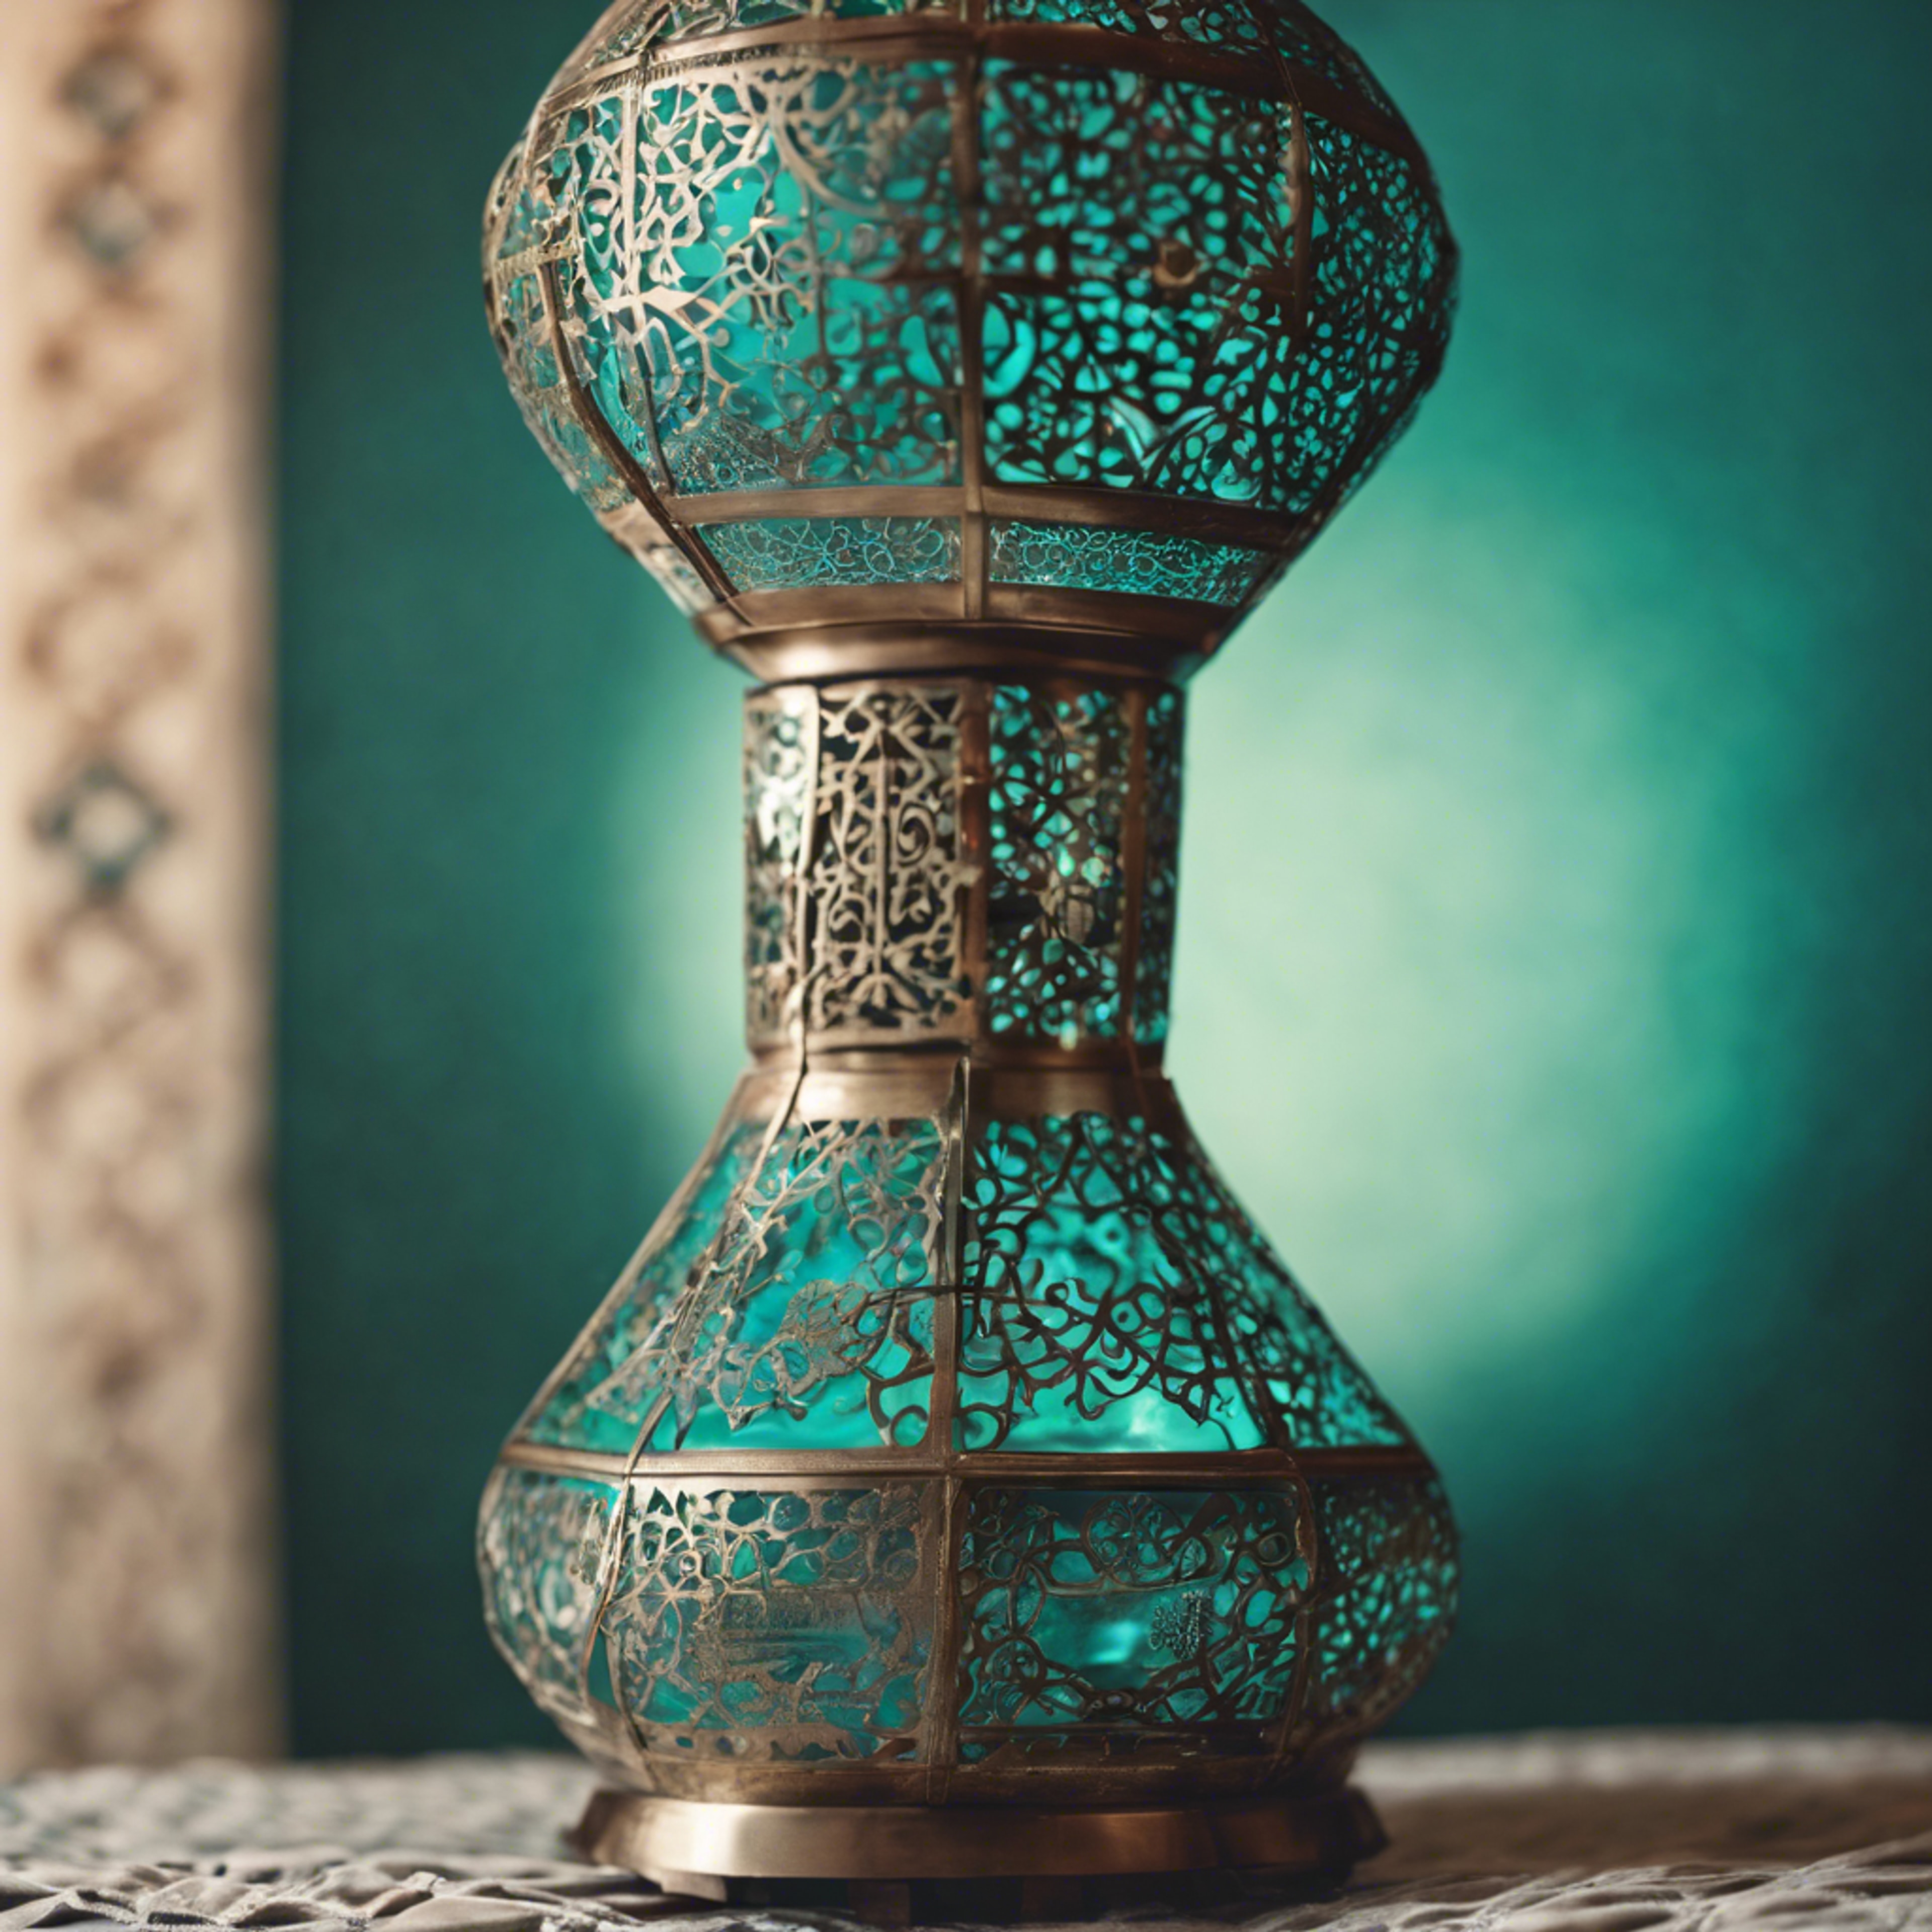 A traditional Moroccan lamp in a cool teal color. Tapeta[a27f0371dbce4744aca5]